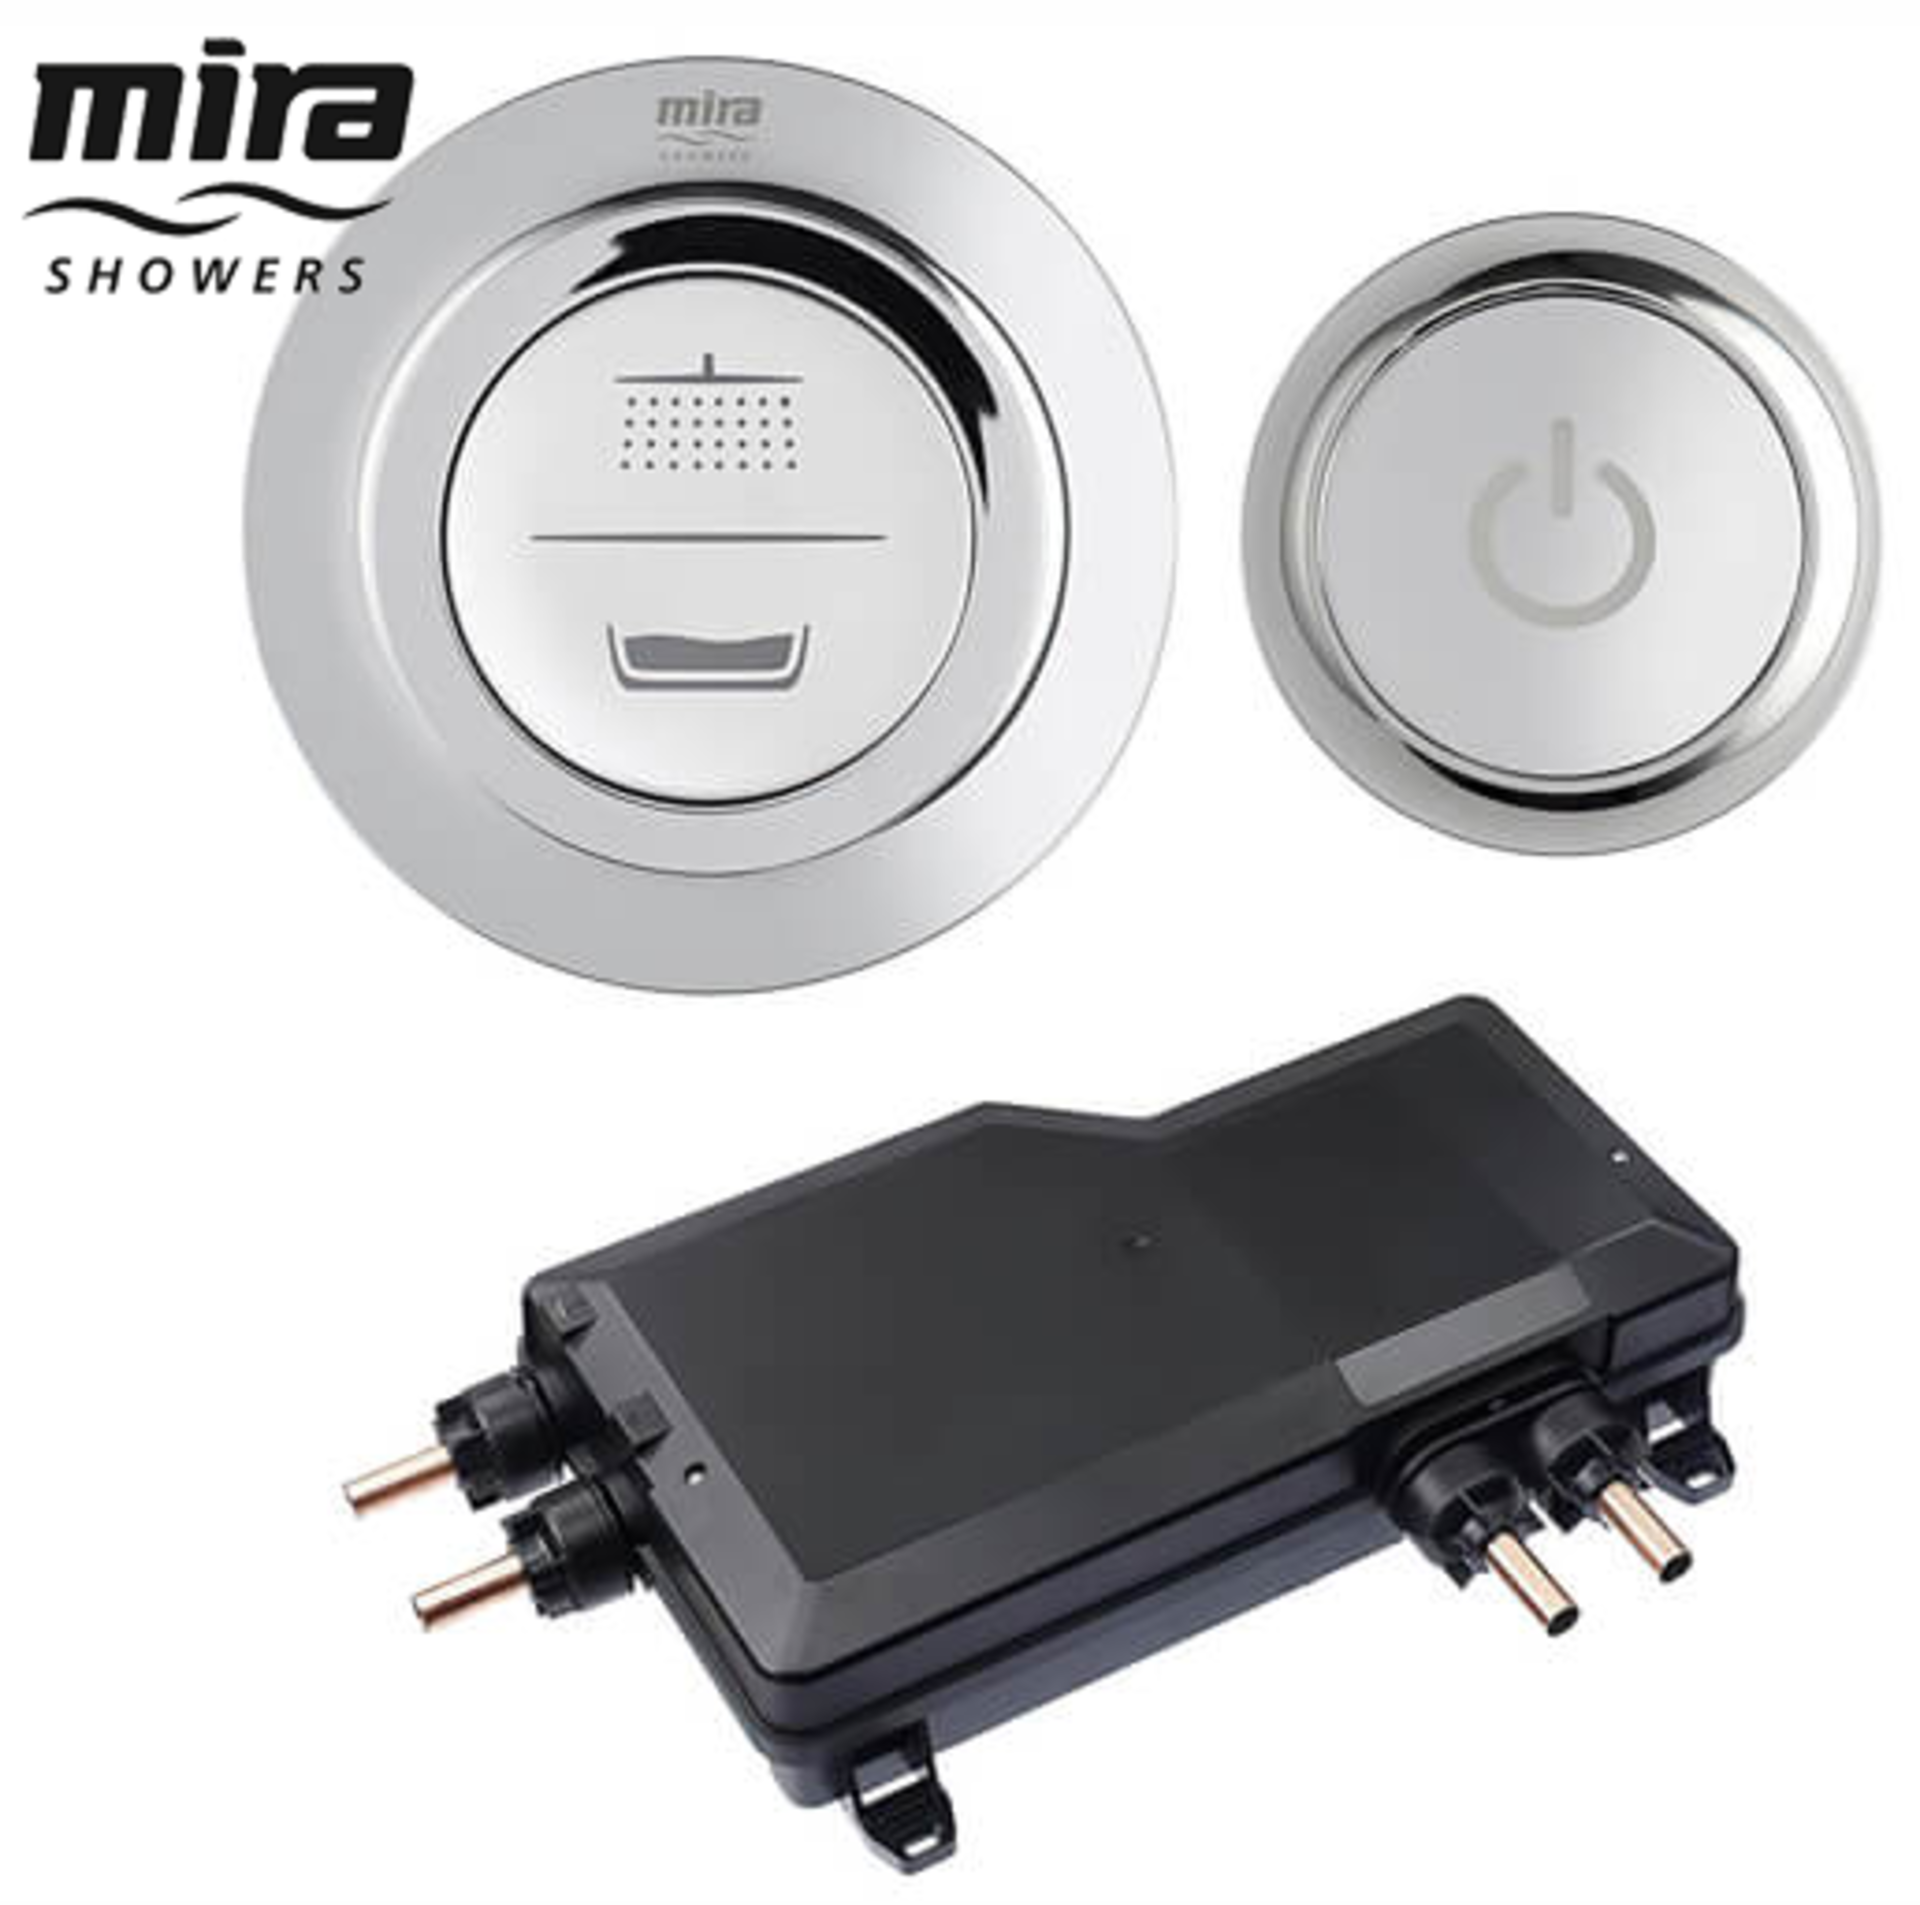 Mira Showers - Mira Mode Bath Pumped For Gravity Systems Valve & Controller Only Digital - 1.1874.